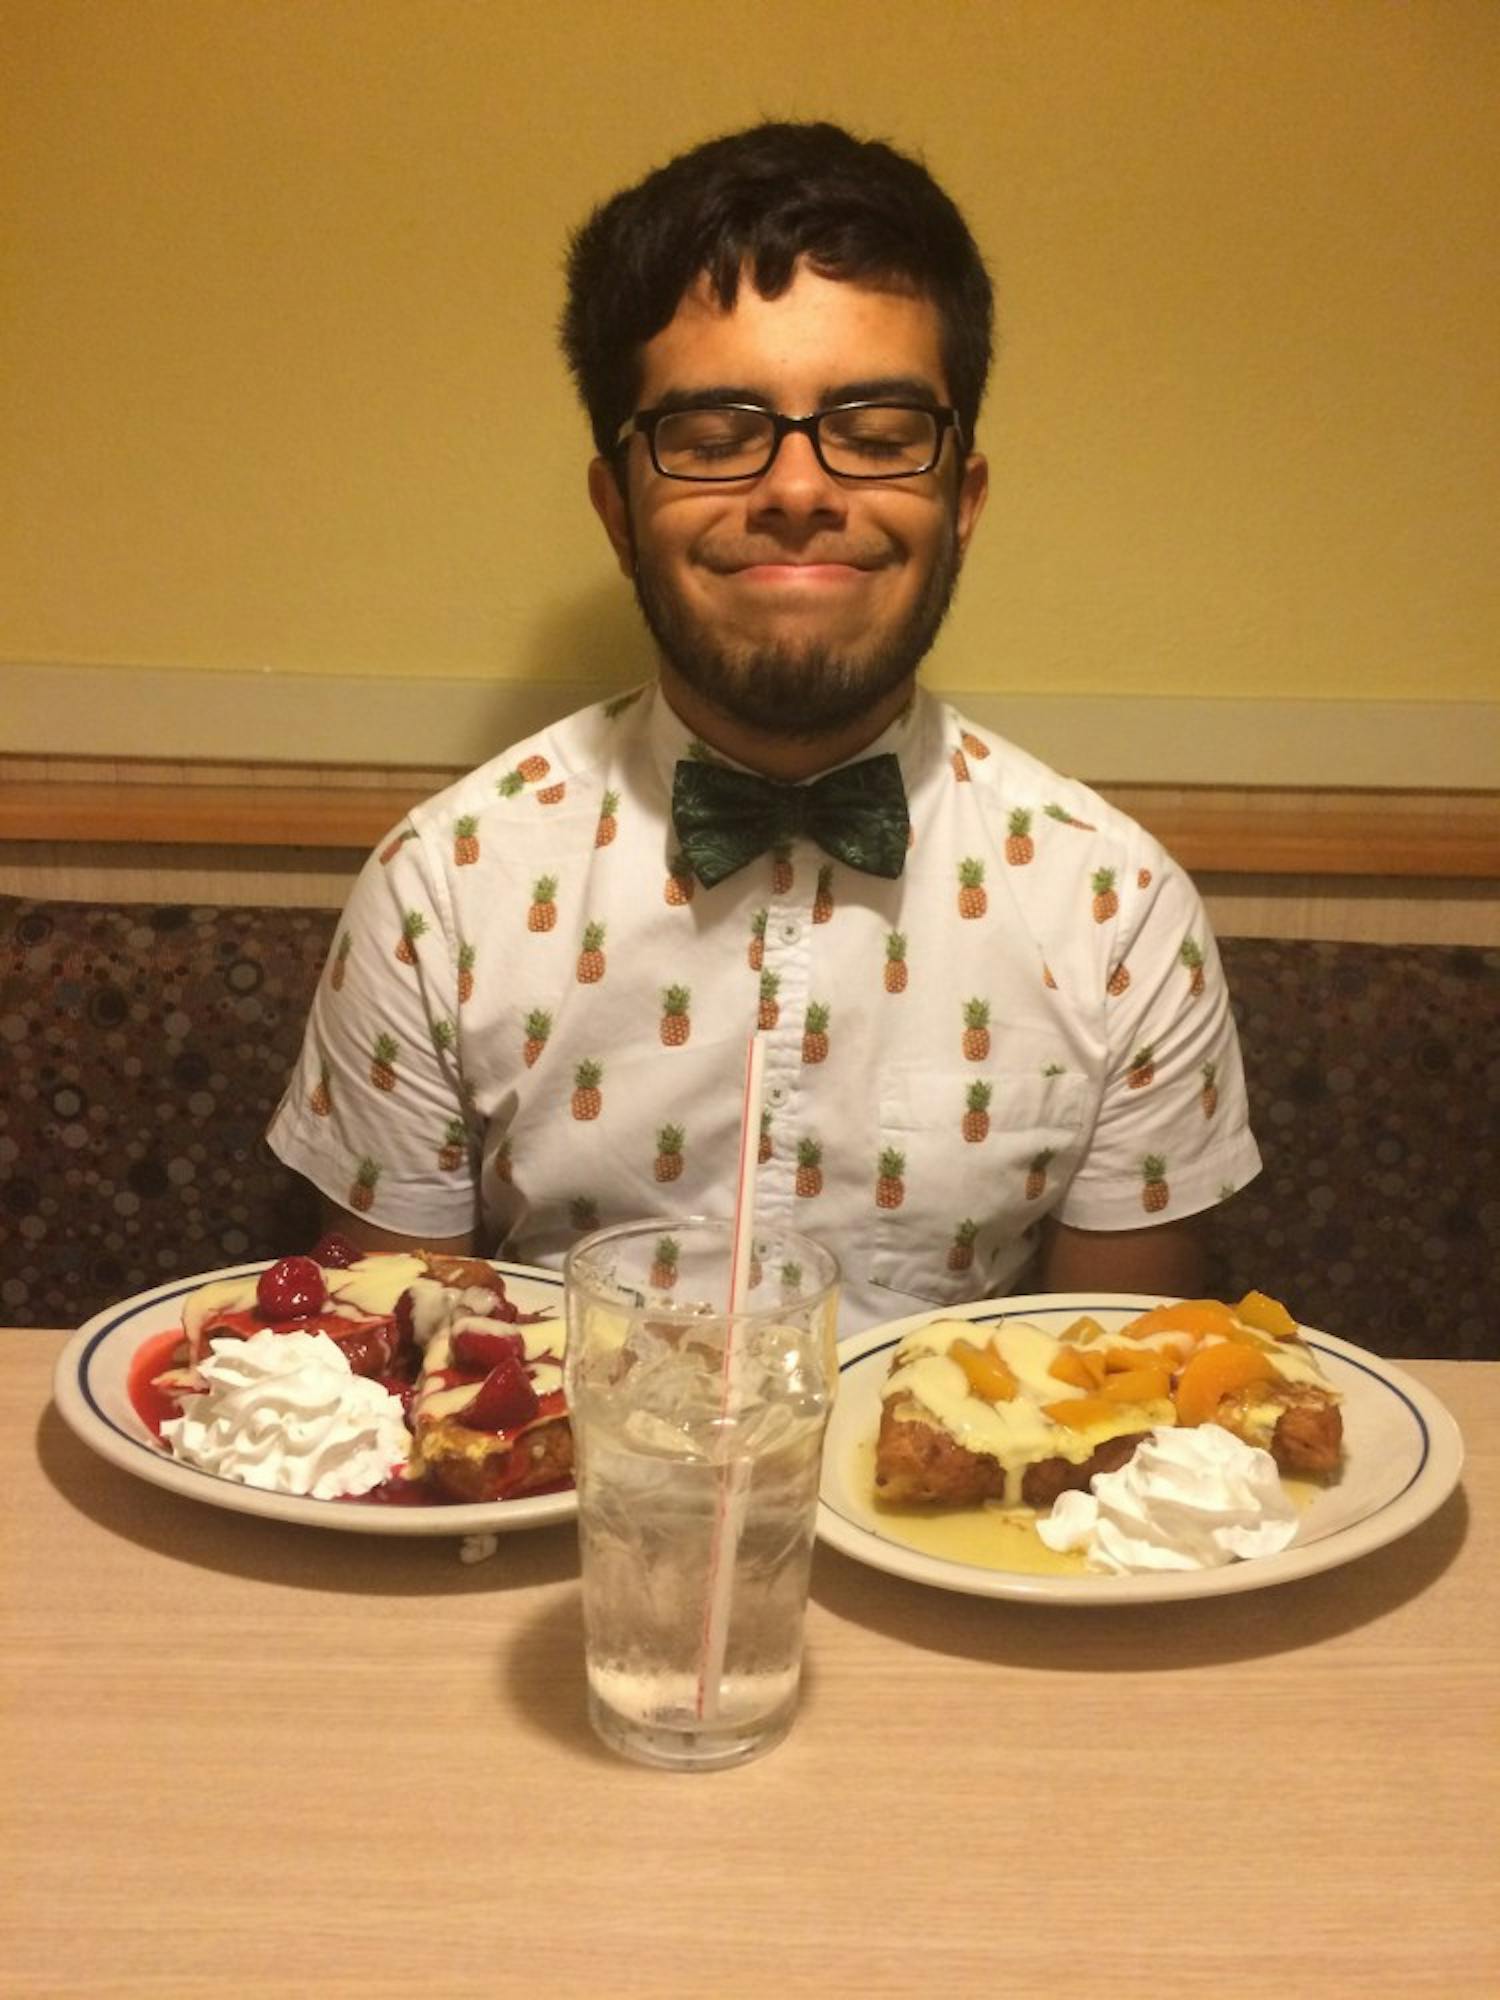 José Valle at IHOP for his 21st birthday dinner.